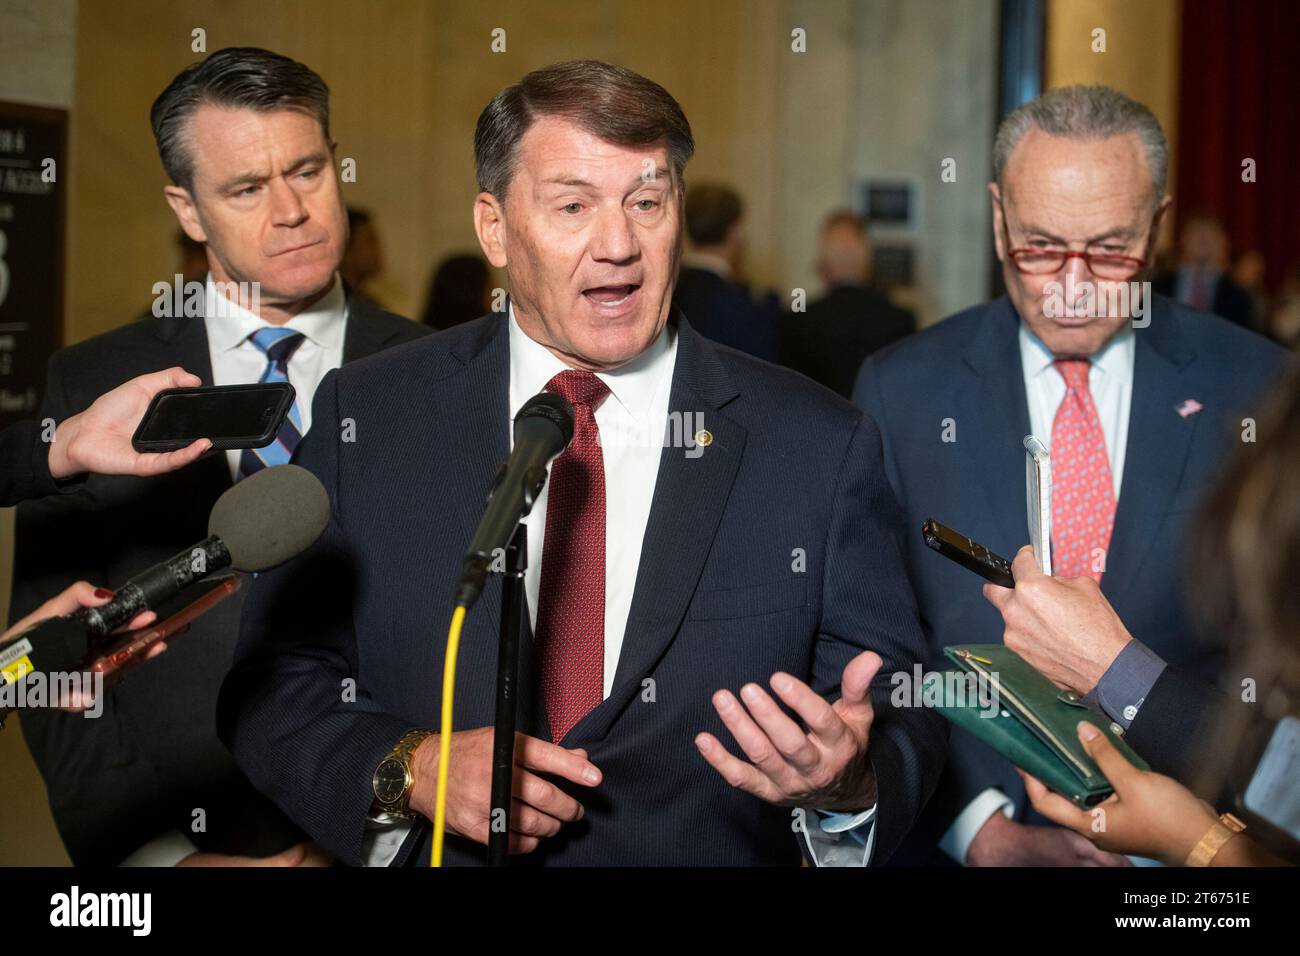 United States Senator Mike Rounds (Republican of South Dakota), center, is joined by United States Senator Todd Young (Republican of Indiana), left, and United States Senate Majority Leader Chuck Schumer (Democrat of New York), right, for a press briefing in between panels of the Senate bipartisan AI Insight Forums in the Russell Senate Office Building in Washington, DC, USA, Wednesday, November 8, 2023. The AI Insight Forums seek to bring together AI stakeholders to supercharge the Congressional process to develop bipartisan artificial intelligence legislation. The Forums have focused on capi Stock Photo